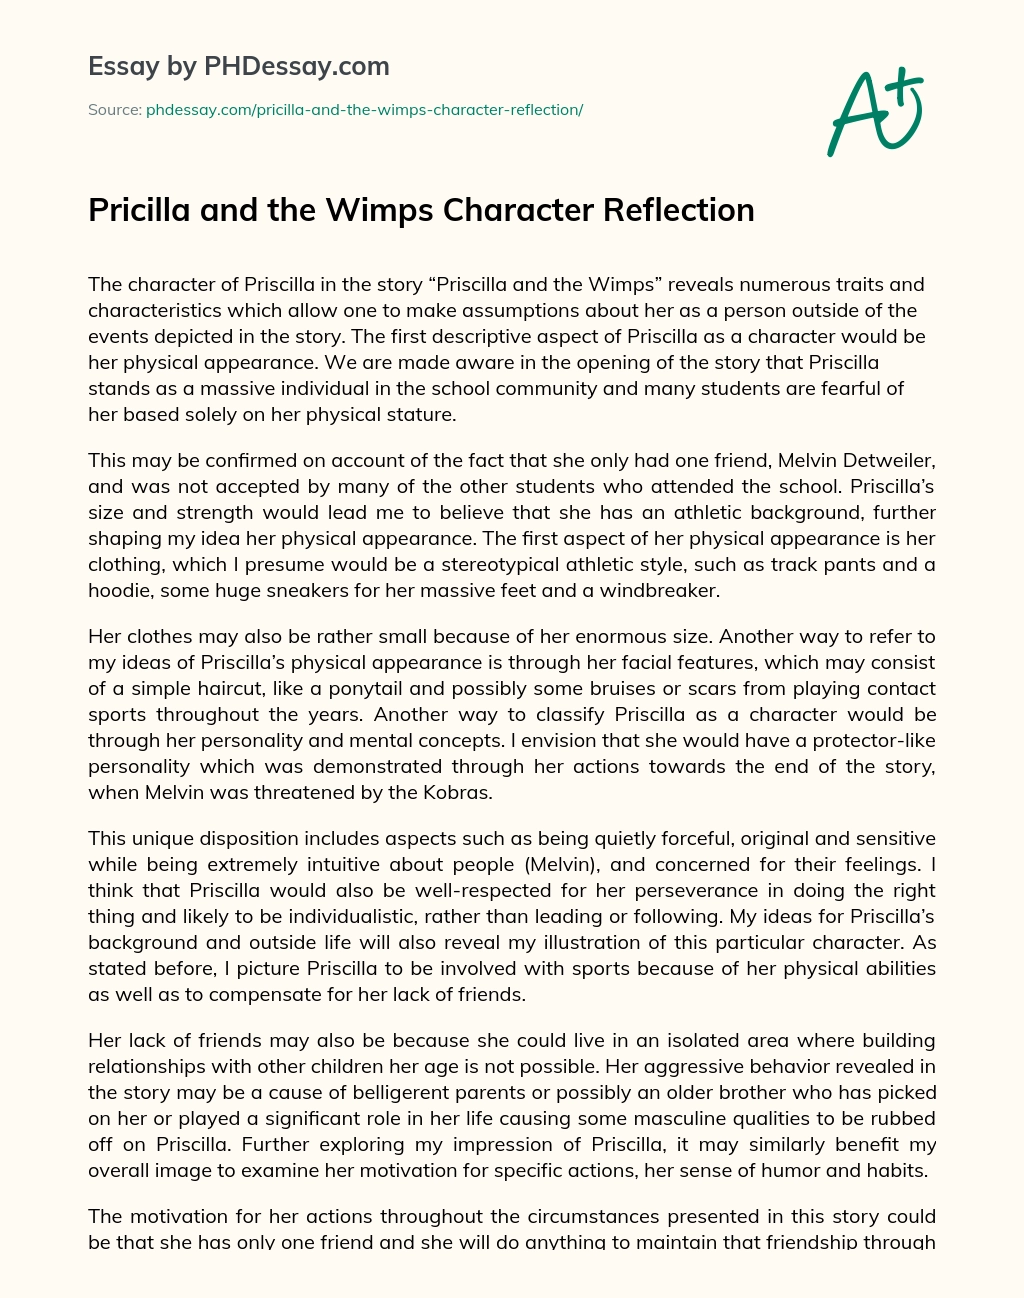 Pricilla and the Wimps Character Reflection essay